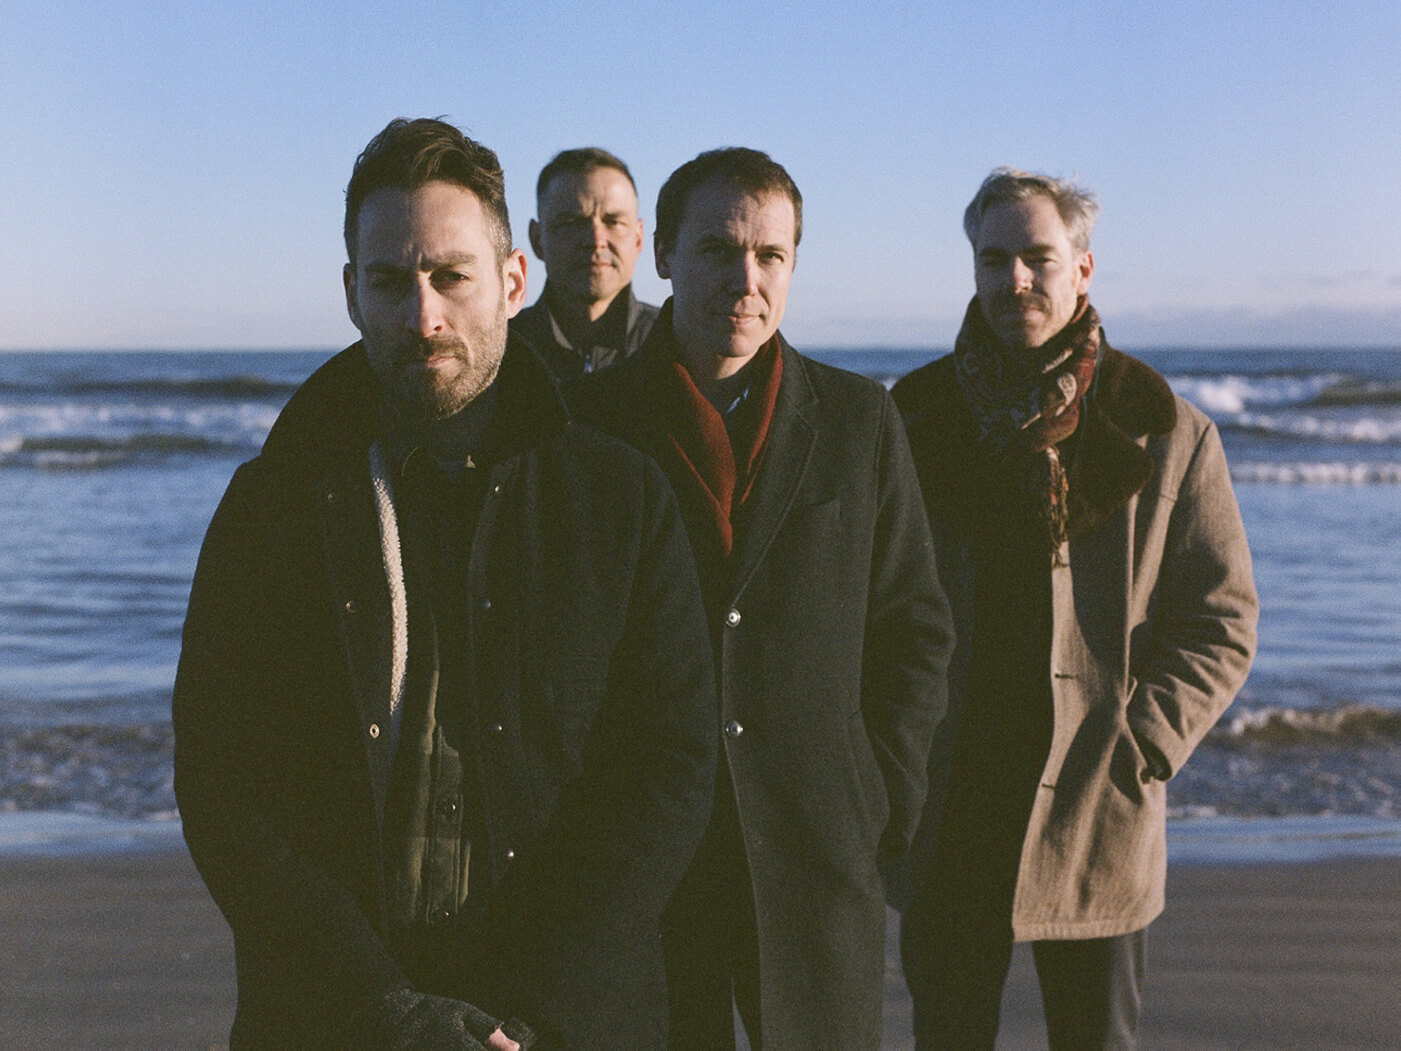 Interview: Emo rockers American Football are back on the gridiron